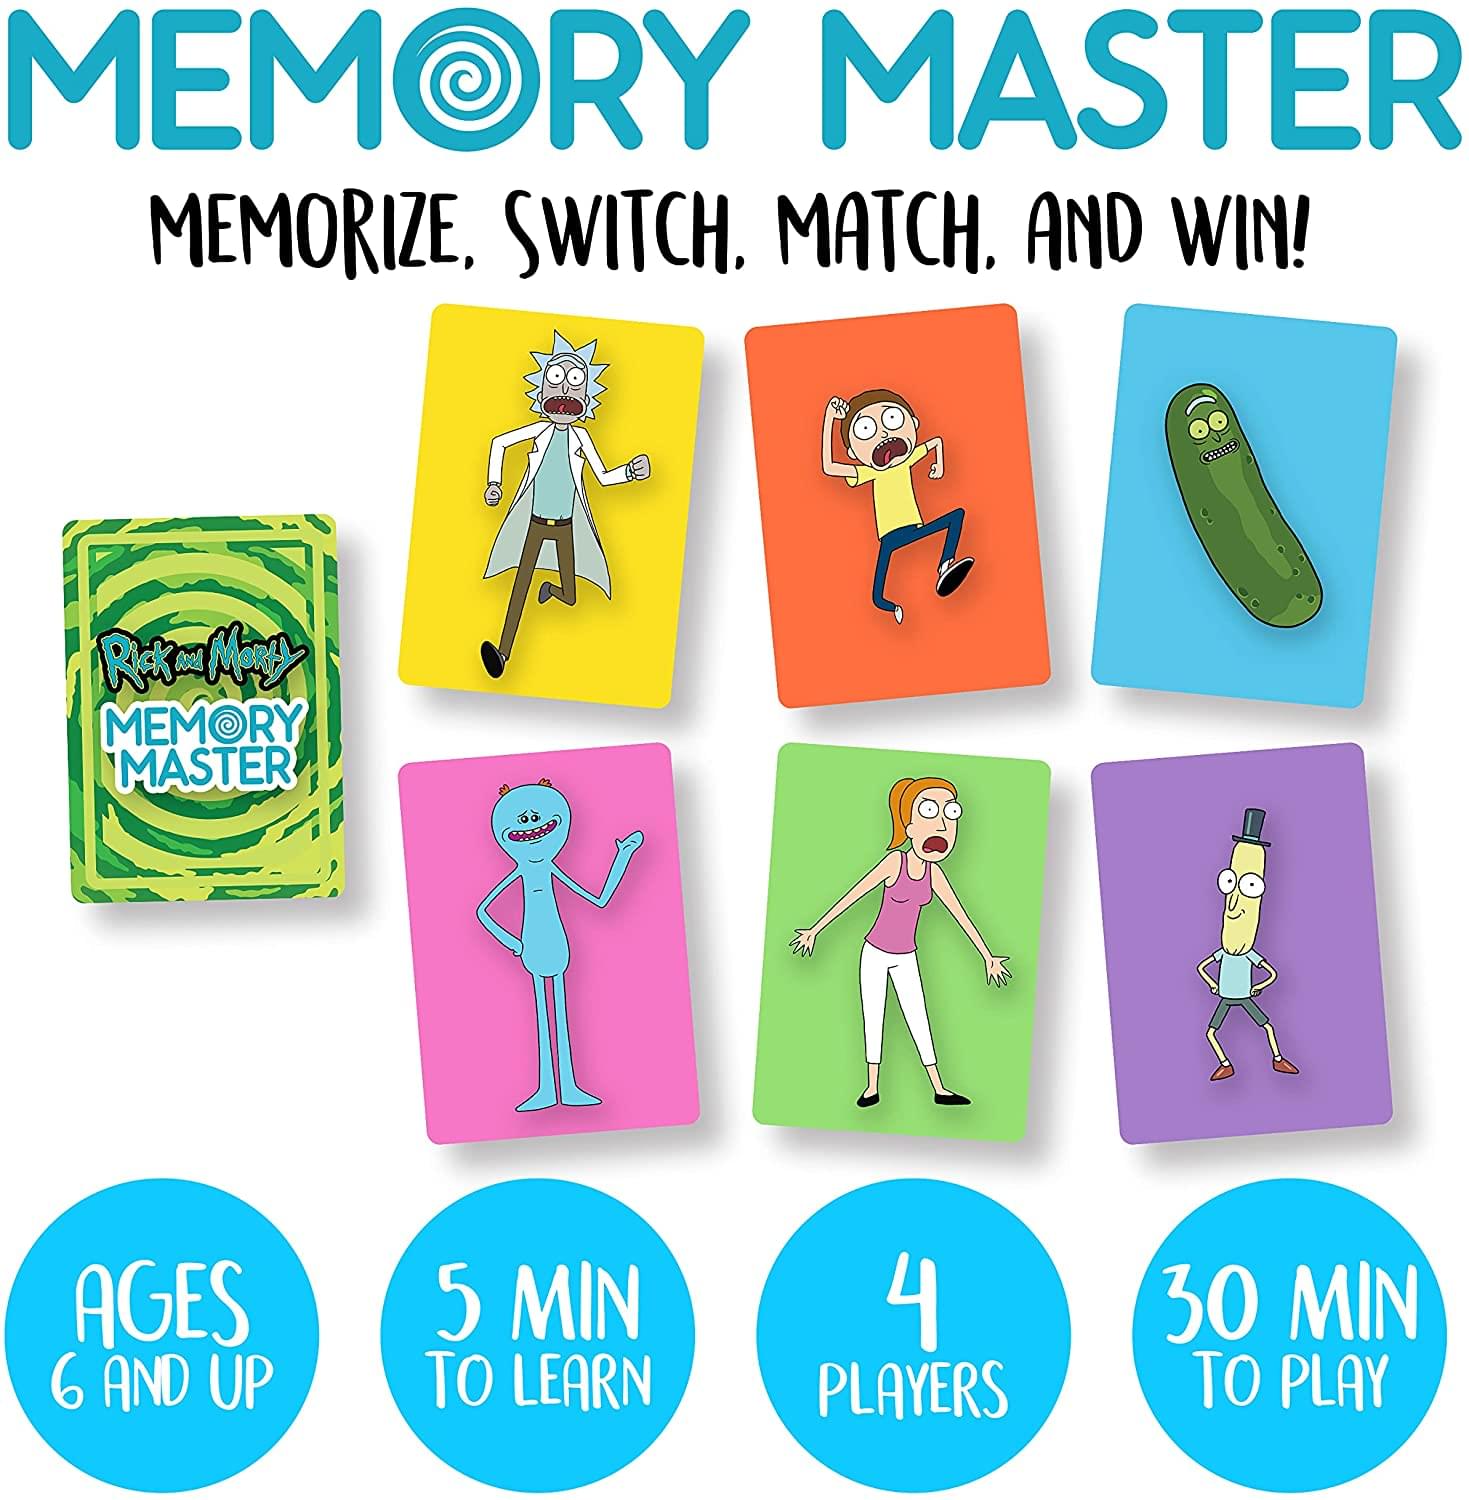 Rick and Morty Memory Master Game | 4 Players